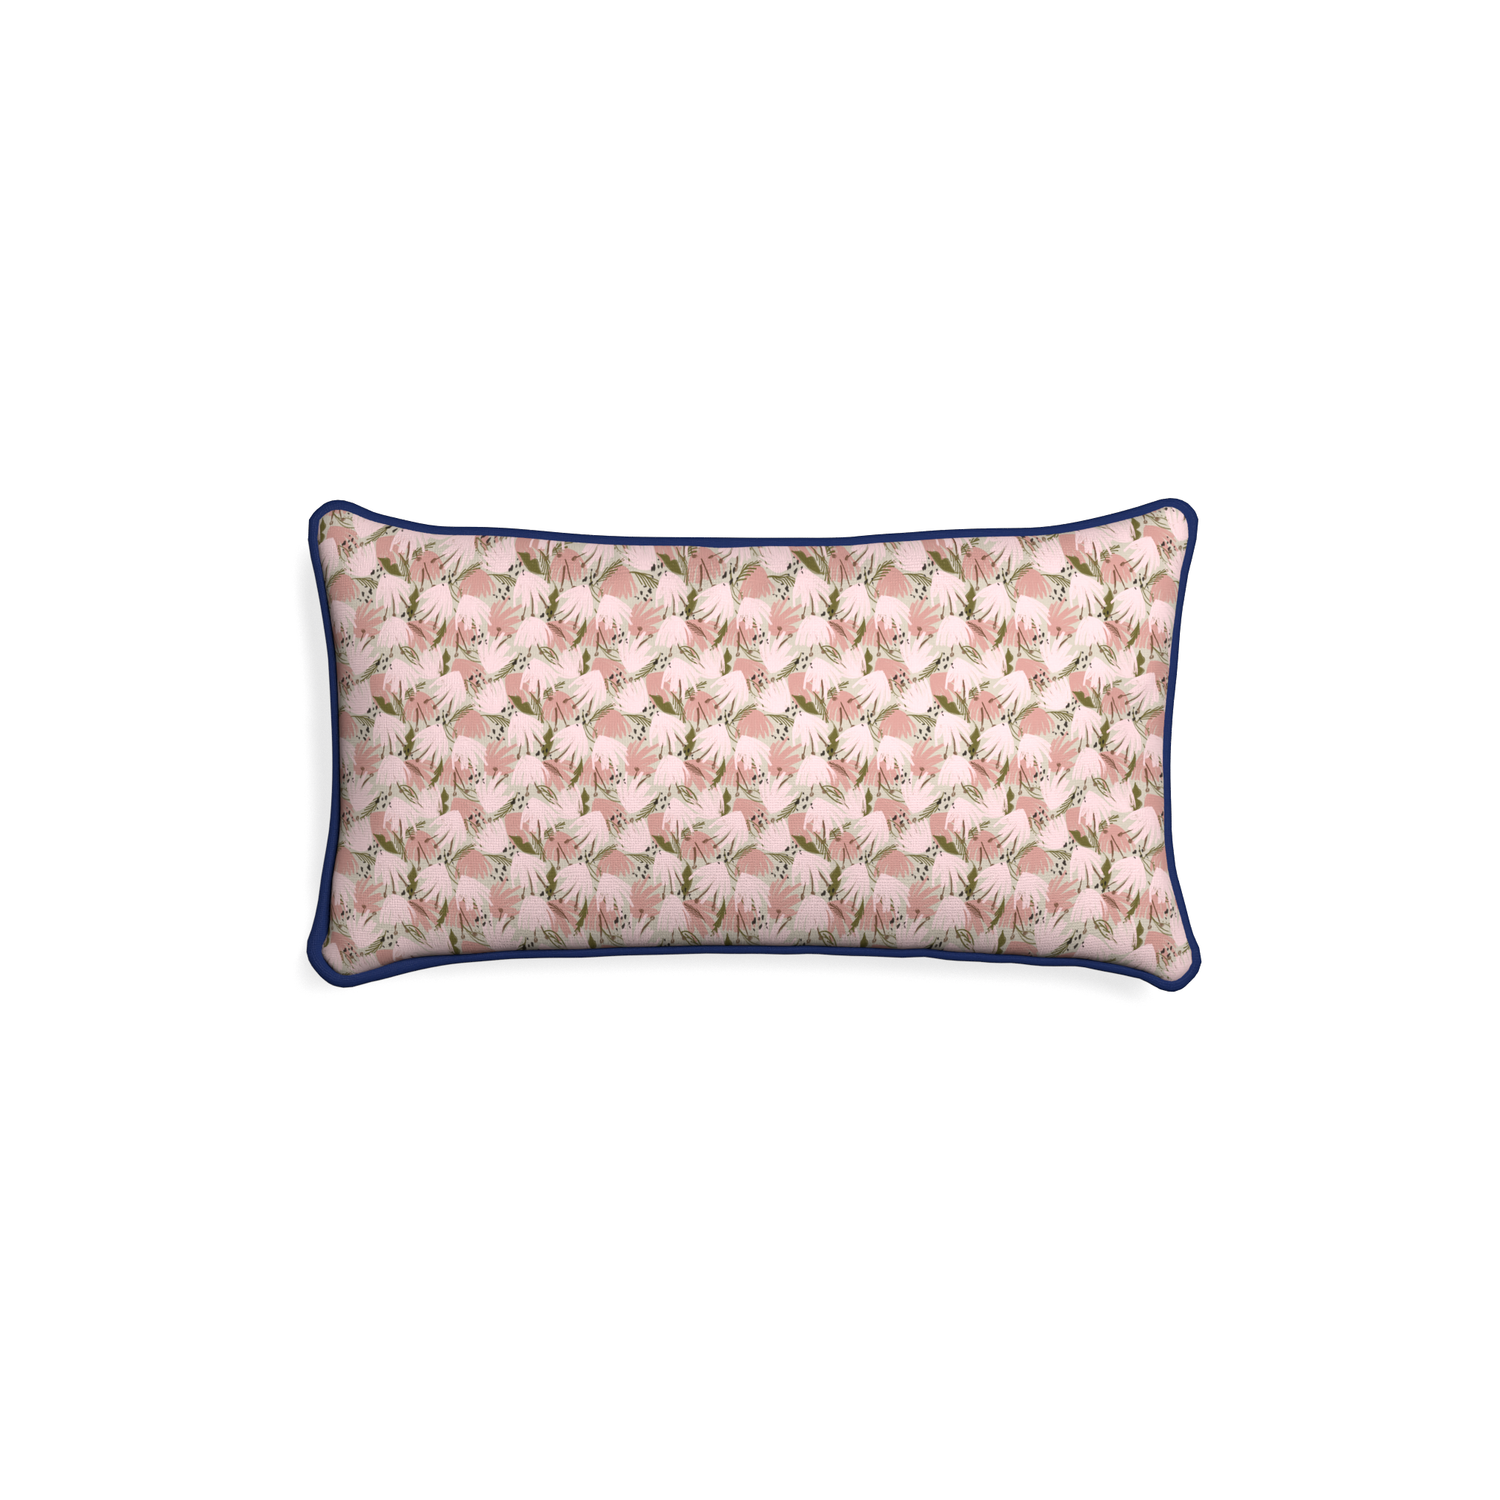 Petite-lumbar eden pink custom pink floralpillow with midnight piping on white background